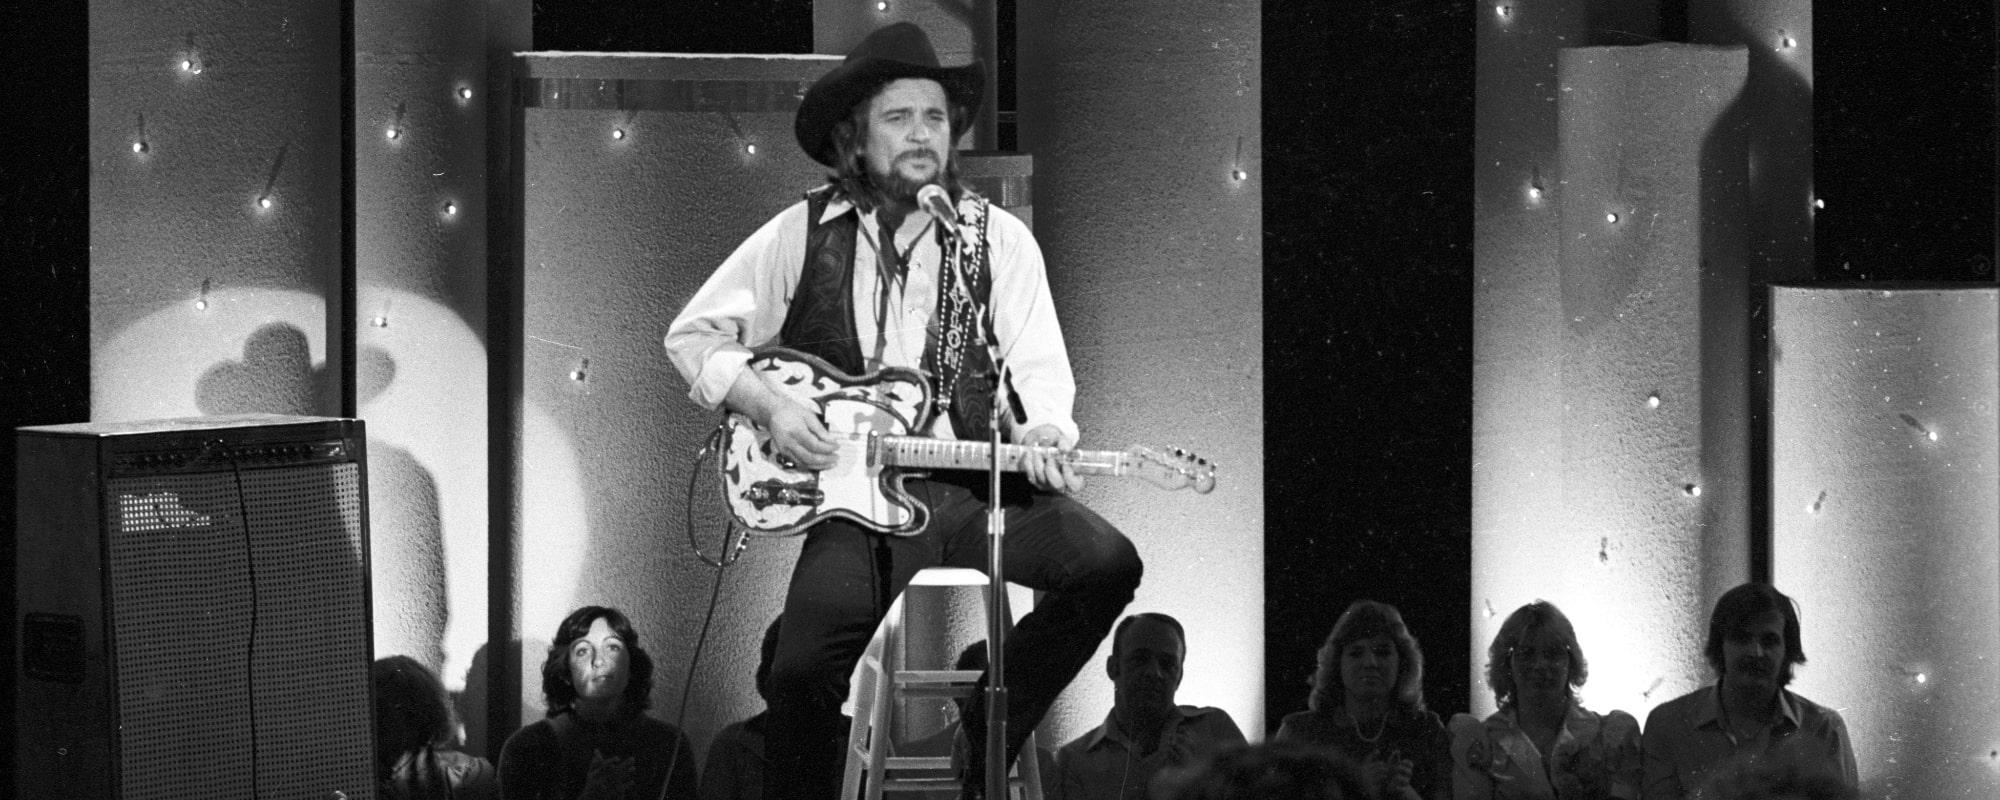 Remember When Waylon Jennings Walked Out of the “We Are the World” Recording Session in 1985?